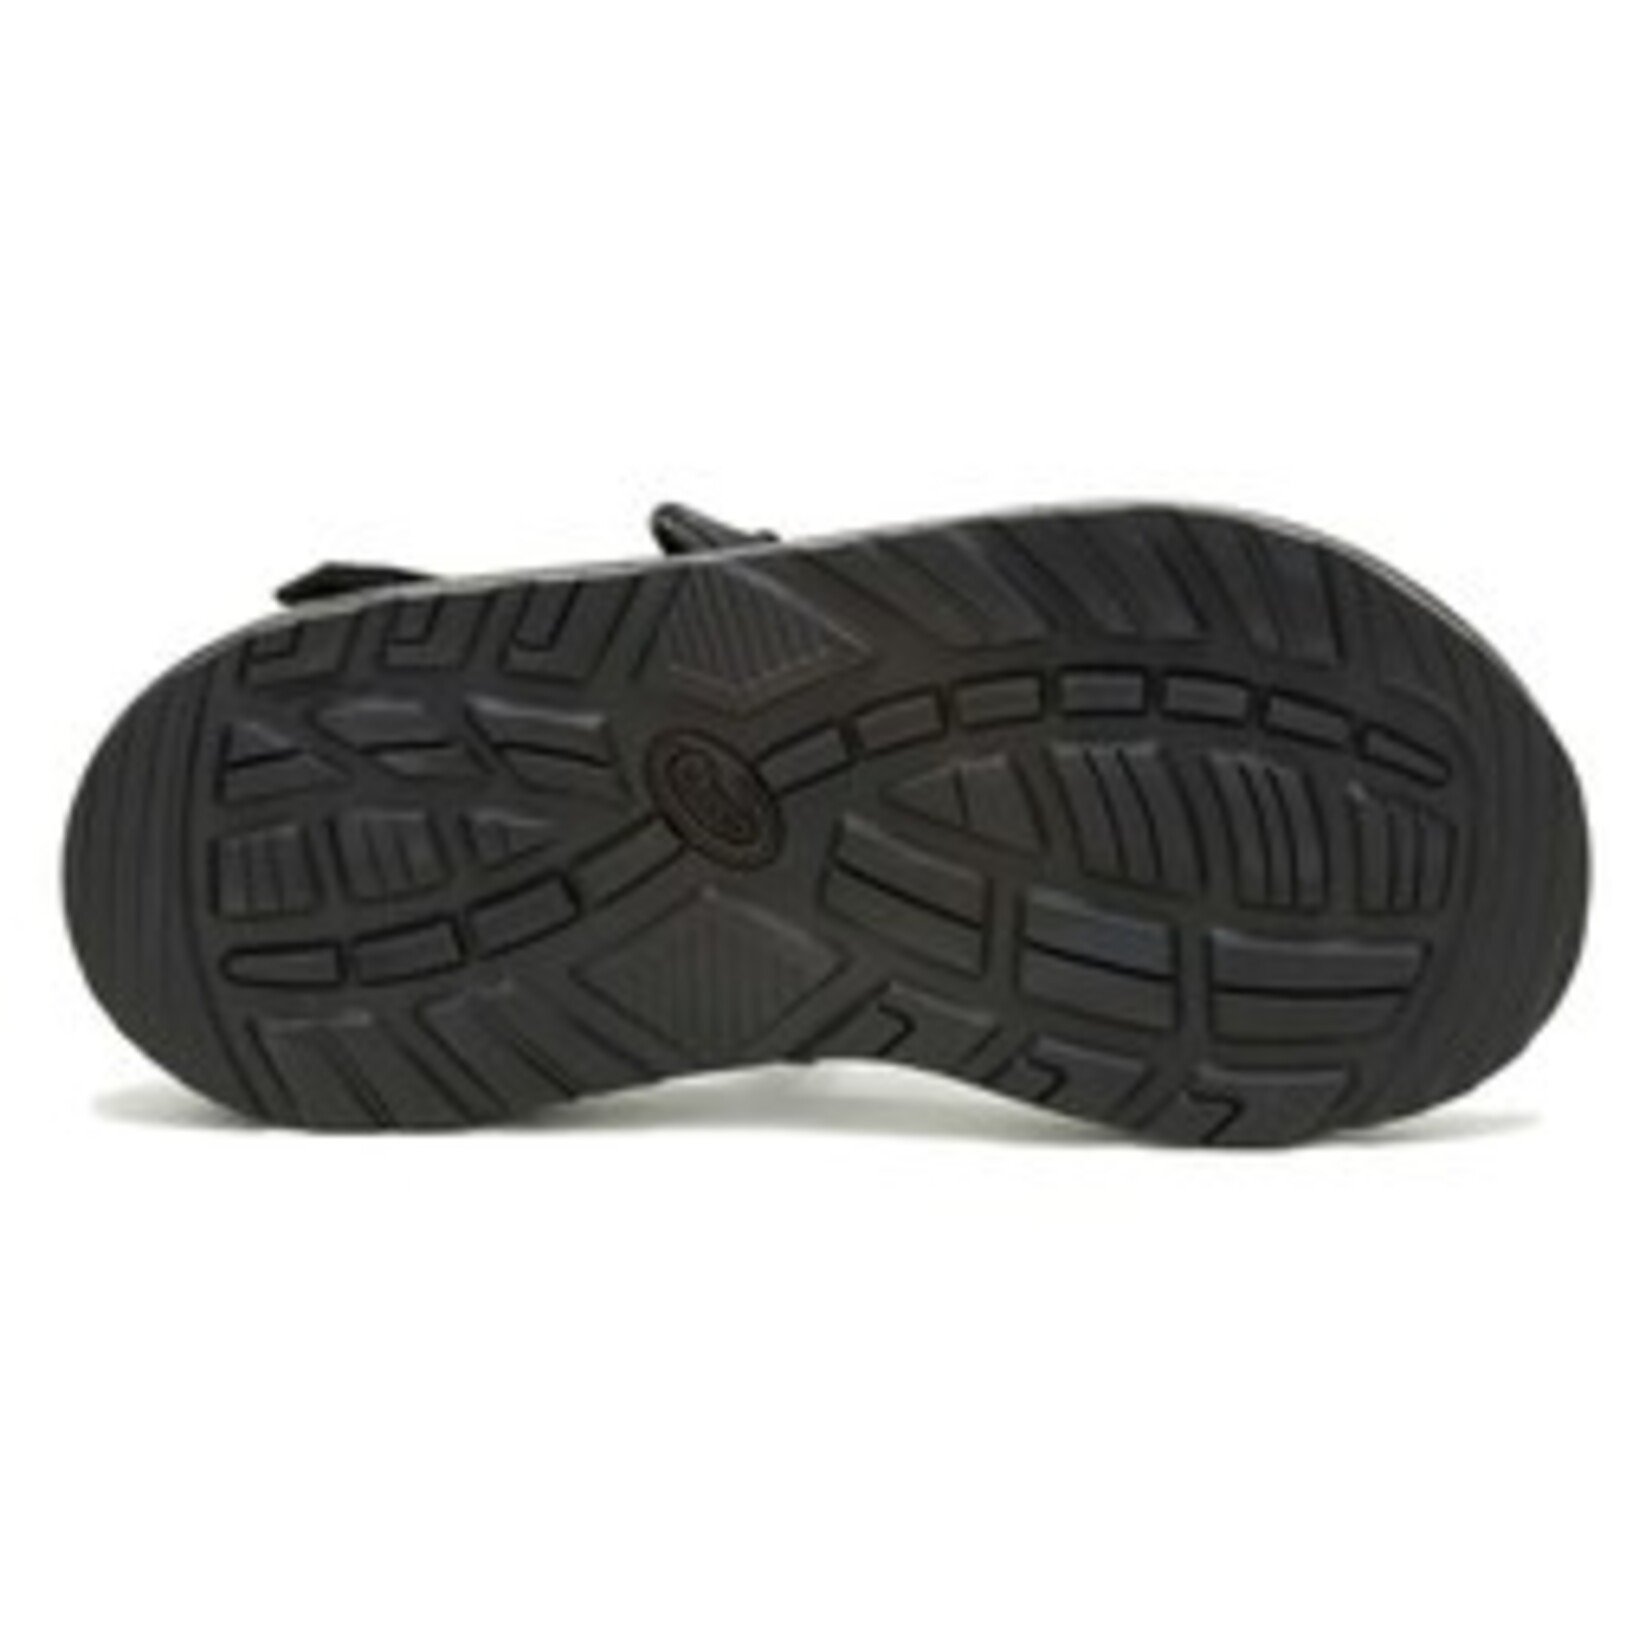 Chaco NRS + Chaco Men's Z/2 Classic Sandals